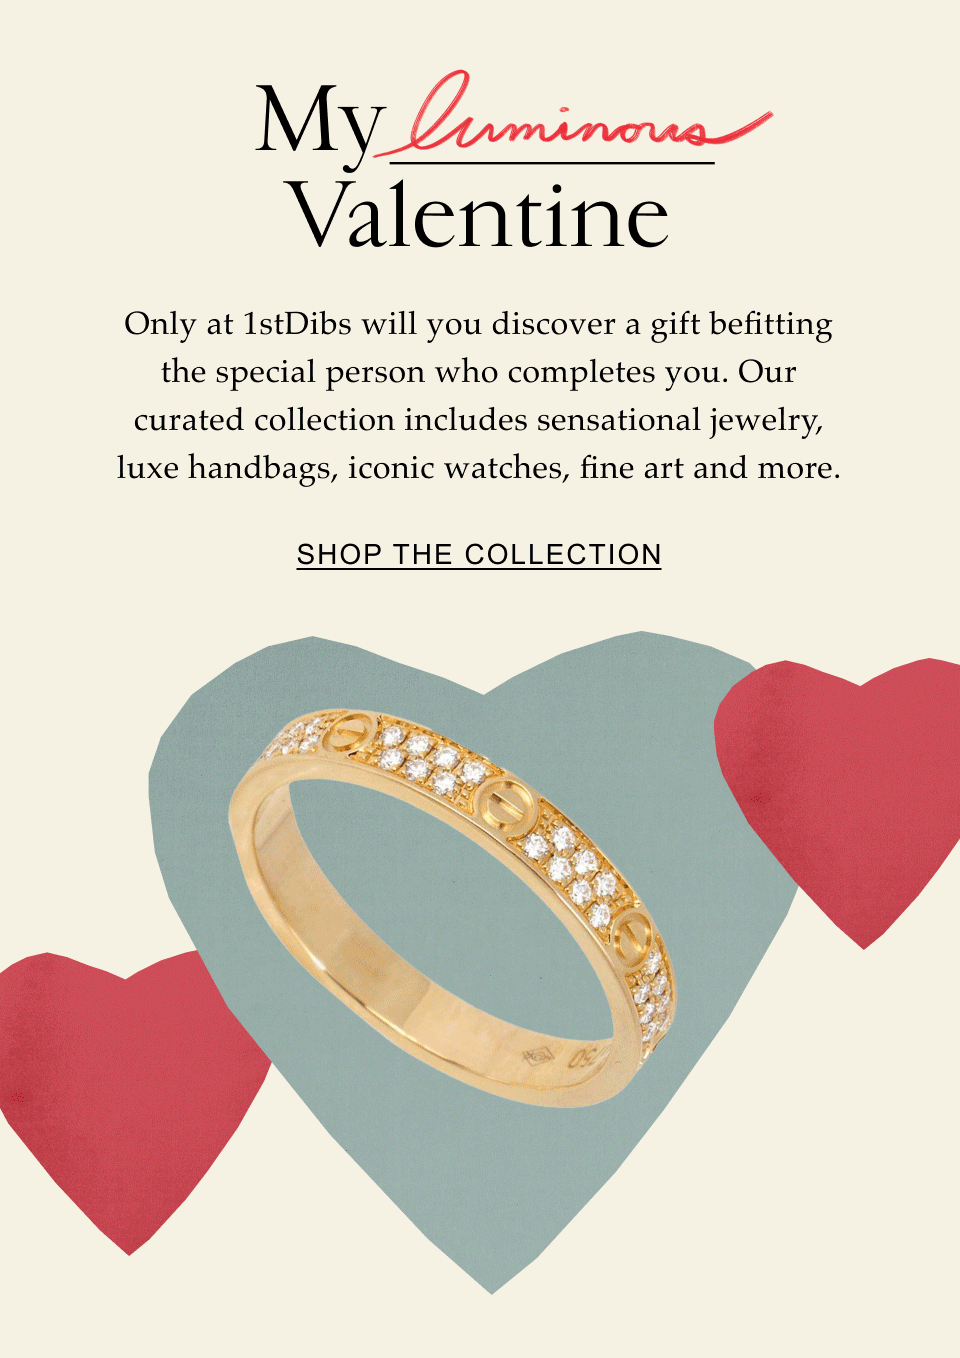 My _____ Valentine Only at 1stDibs will you discover a gift befitting the special person who completes you. Our curated collection includes sensational jewelry, luxe handbags, iconic watches, fine art and more. Shop the Collection